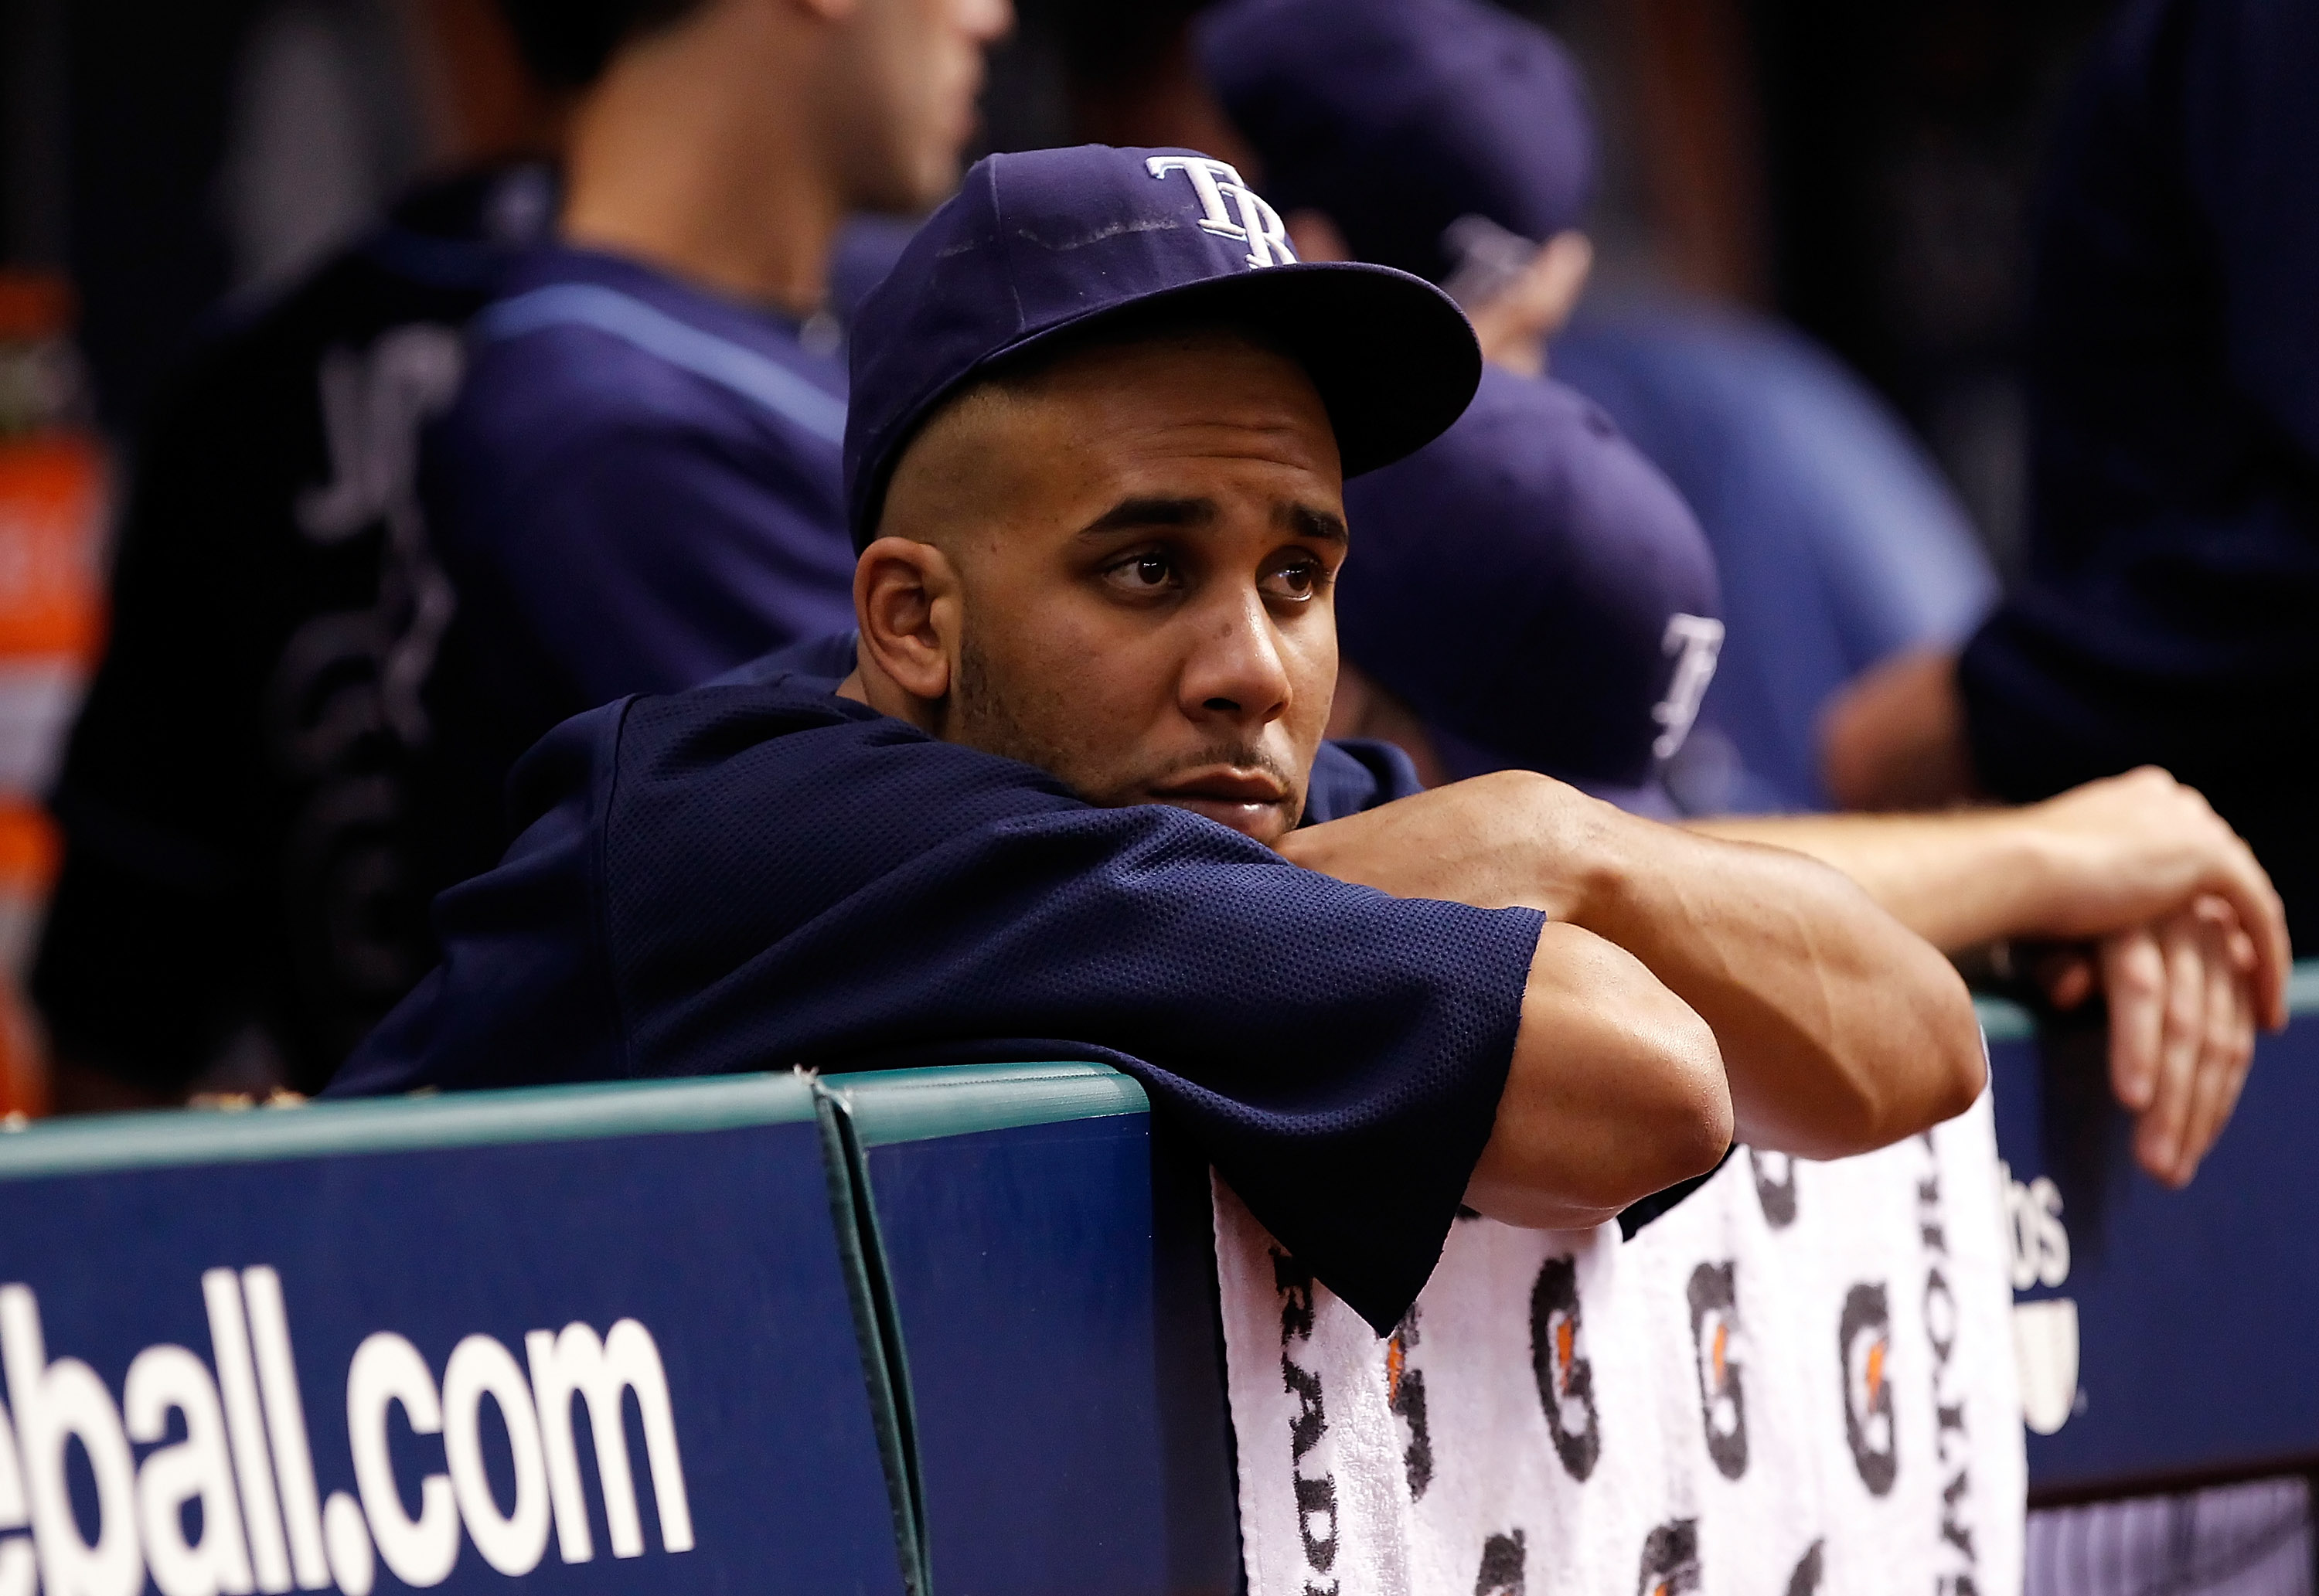 ST. PETERSBURG, FL - OCTOBER 12:  Pitcher David Price #14 of the Tampa Bay Rays watches his team against the Texas Rangers during Game 5 of the ALDS at Tropicana Field on October 12, 2010 in St. Petersburg, Florida.  (Photo by J. Meric/Getty Images)